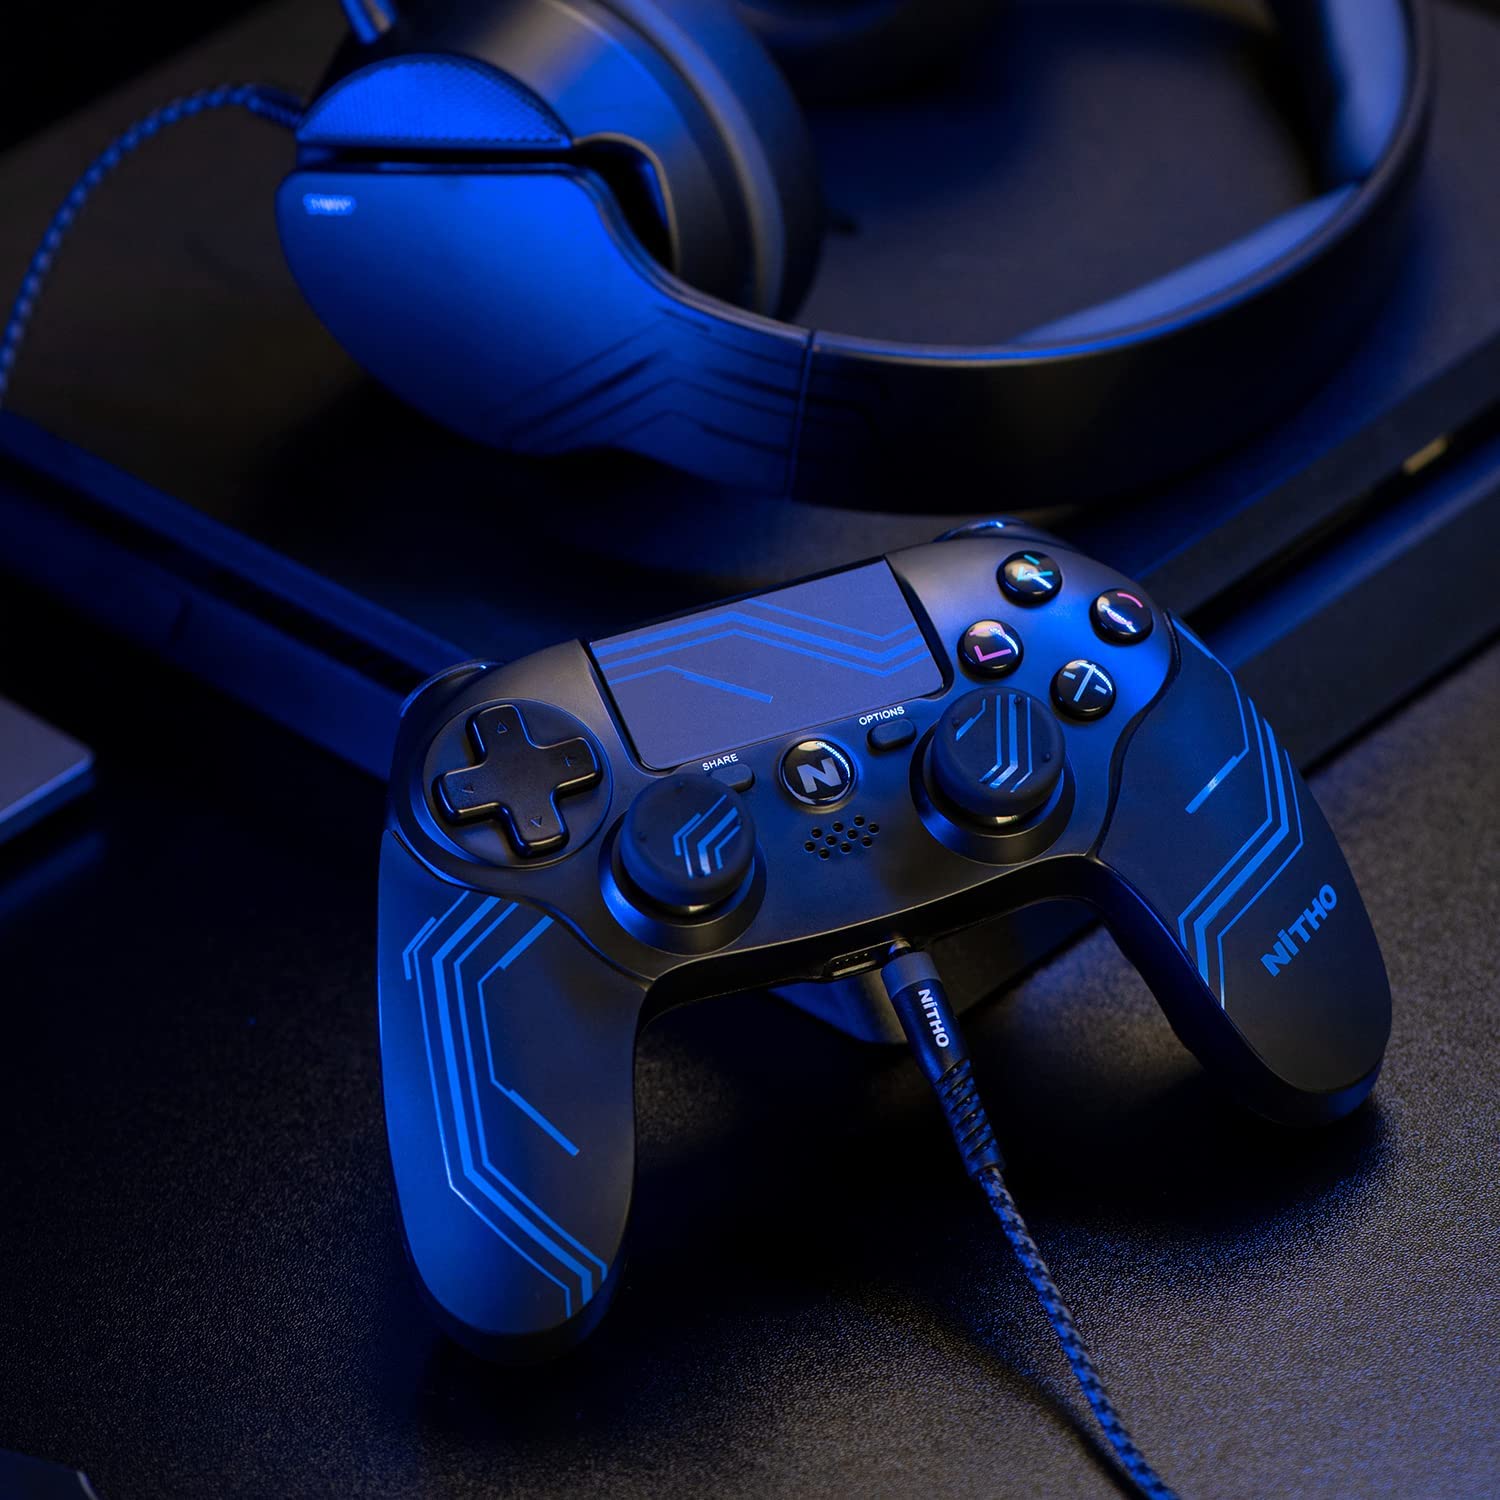 PS4 | PS3 | PC Nitho Wireless Controller Adonis - Black/Blue